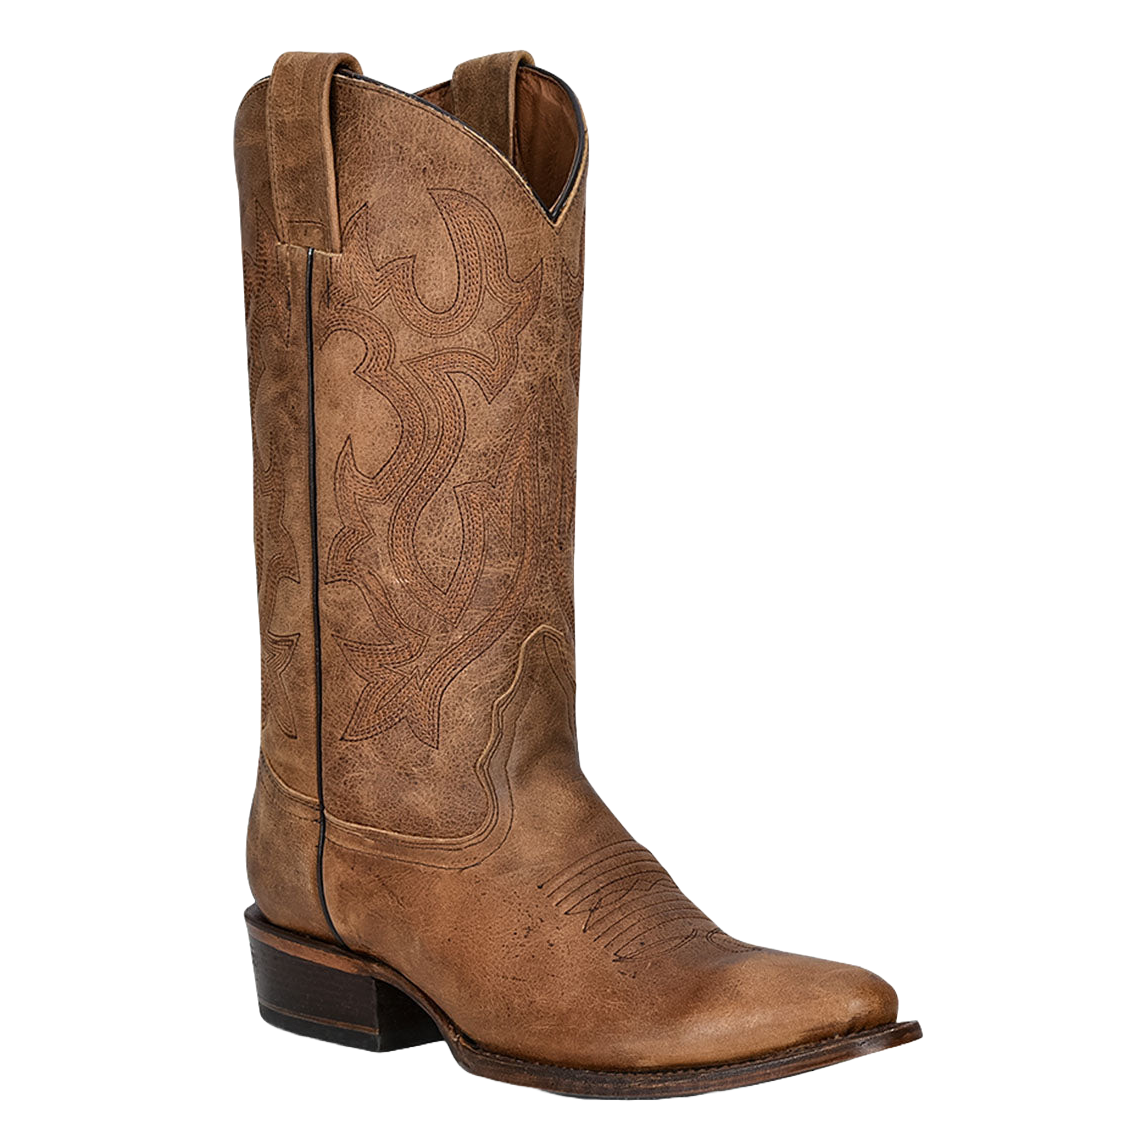 Circle G by Corral Men's Tan Brown Embroidery Round Toe Boots L5888